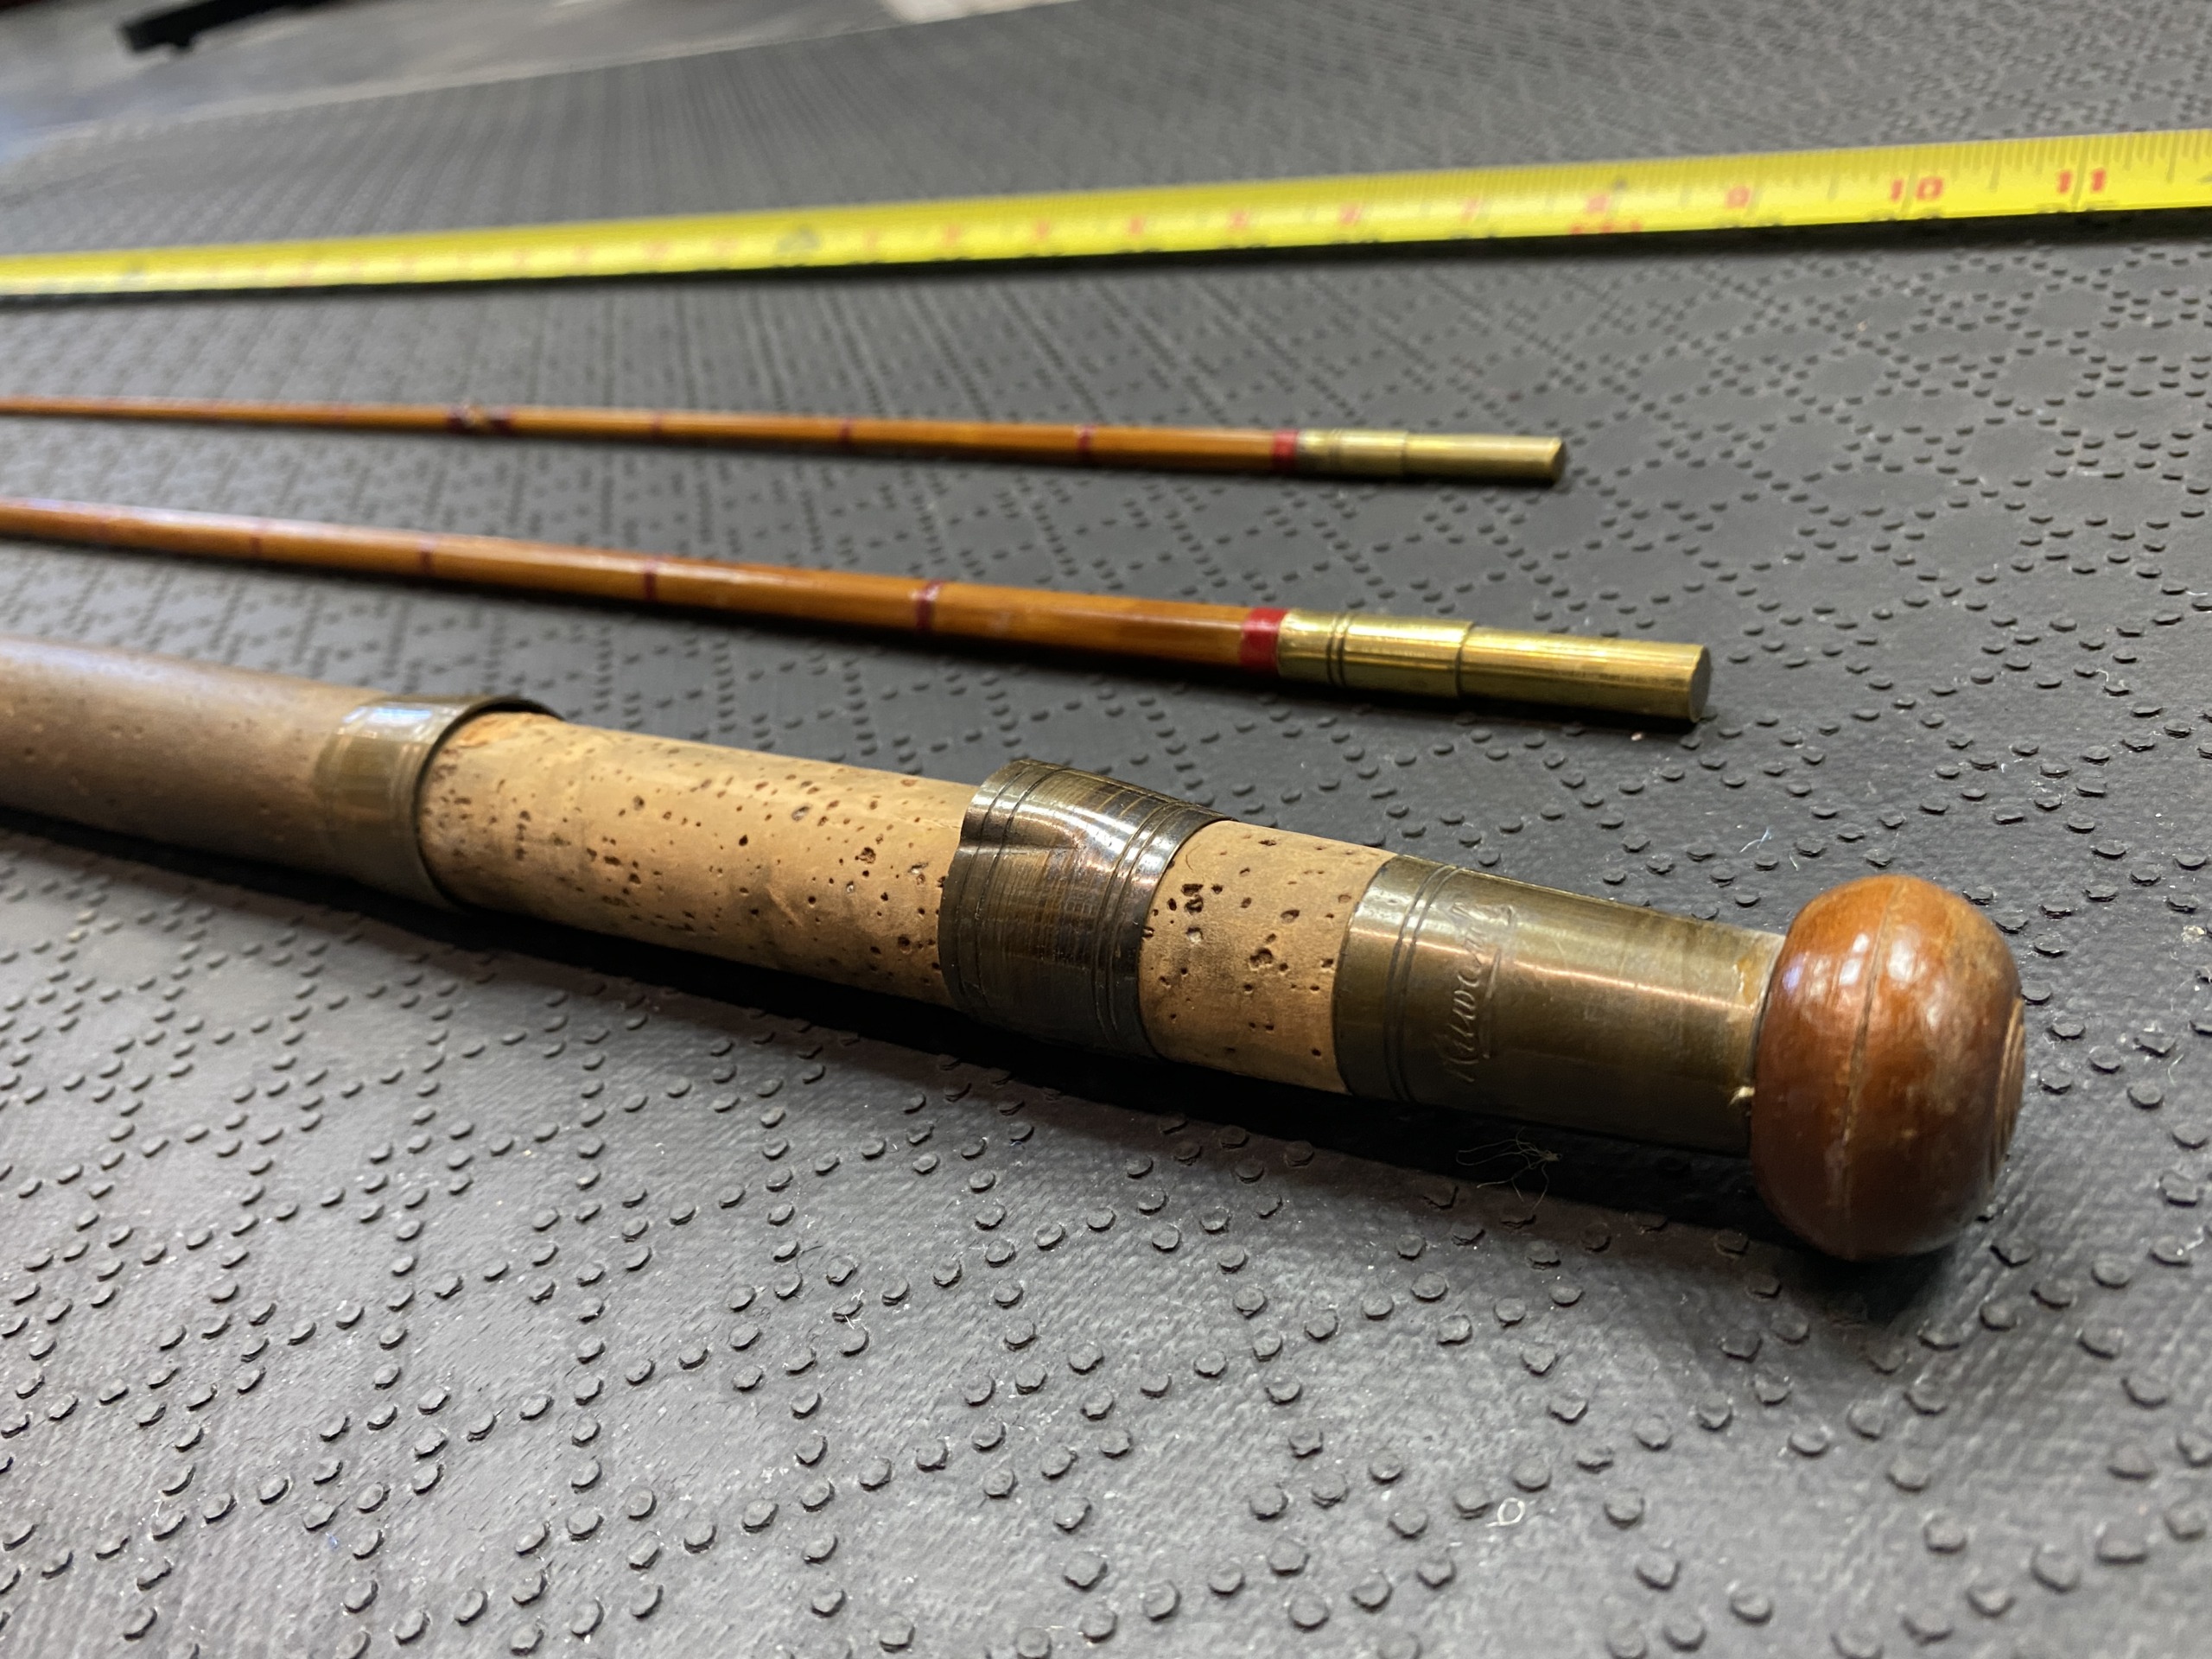 https://thefirstcast.ca/wp-content/uploads/2022/10/Vintage-Milwards-9-Foot-3-Piece-Bamboo-Fly-Rod-E-scaled.jpg